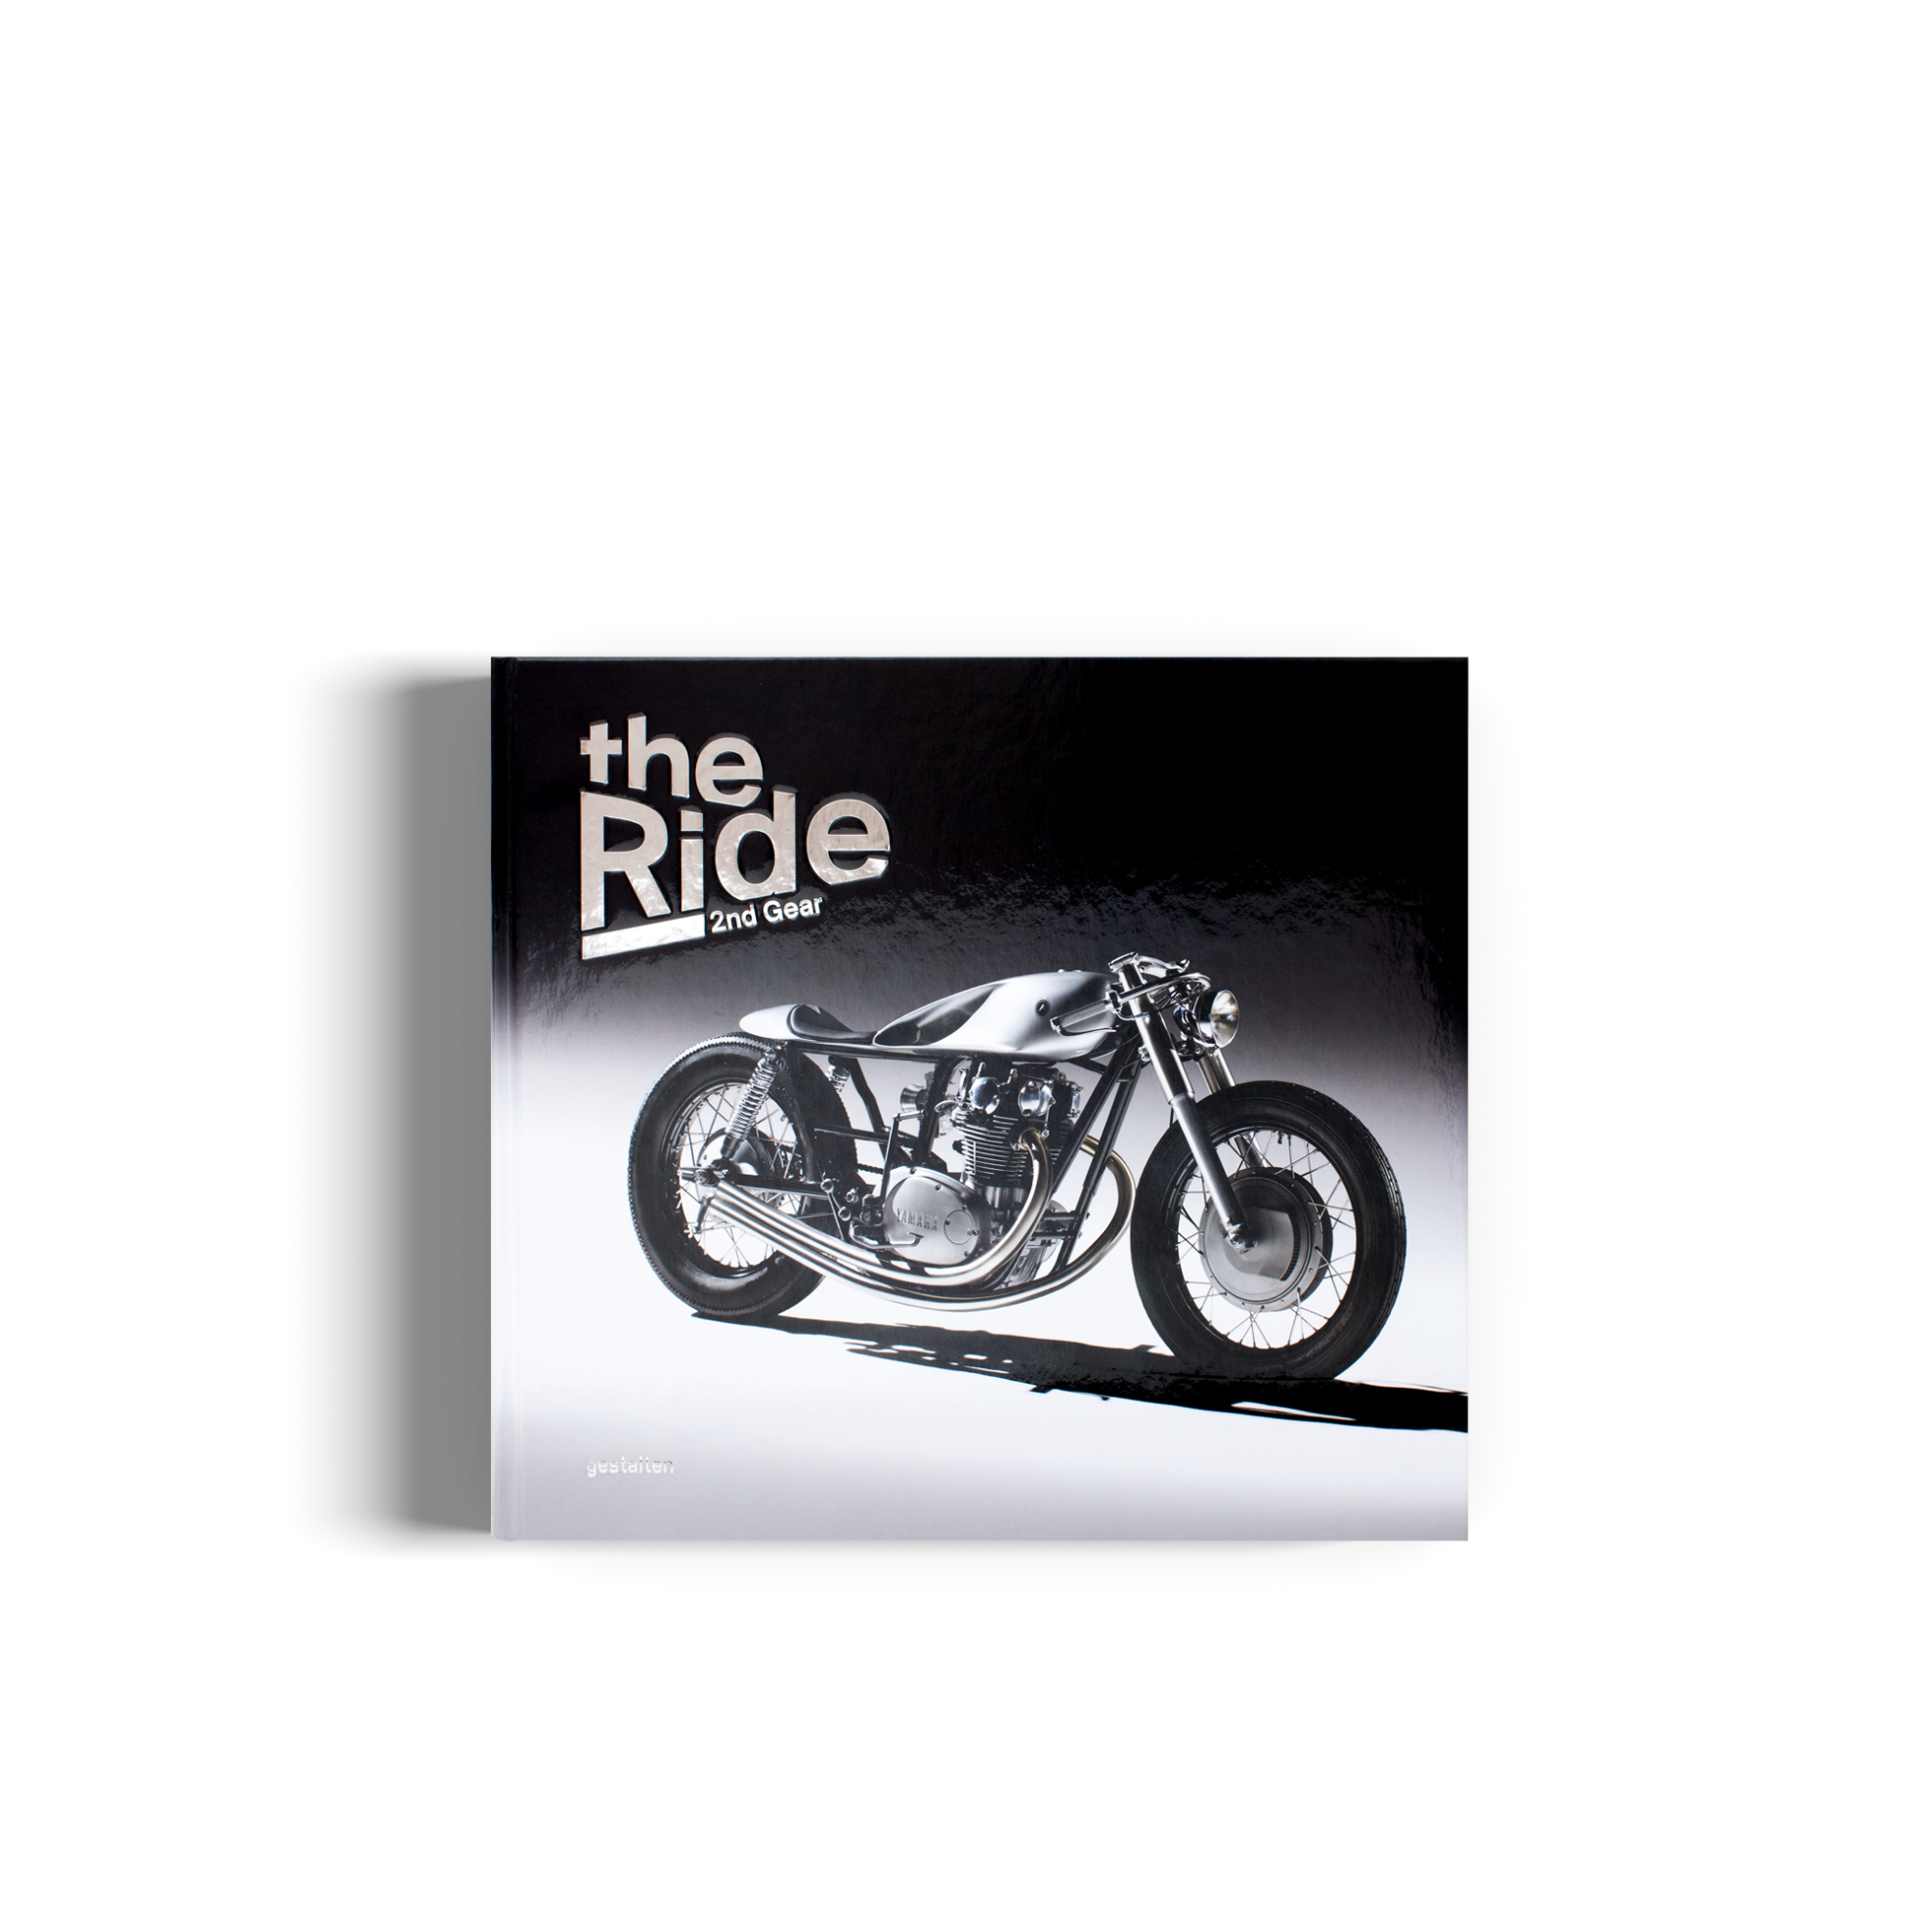 The Ride 2nd Gear: New Custom Motorcycles and Their Builders 